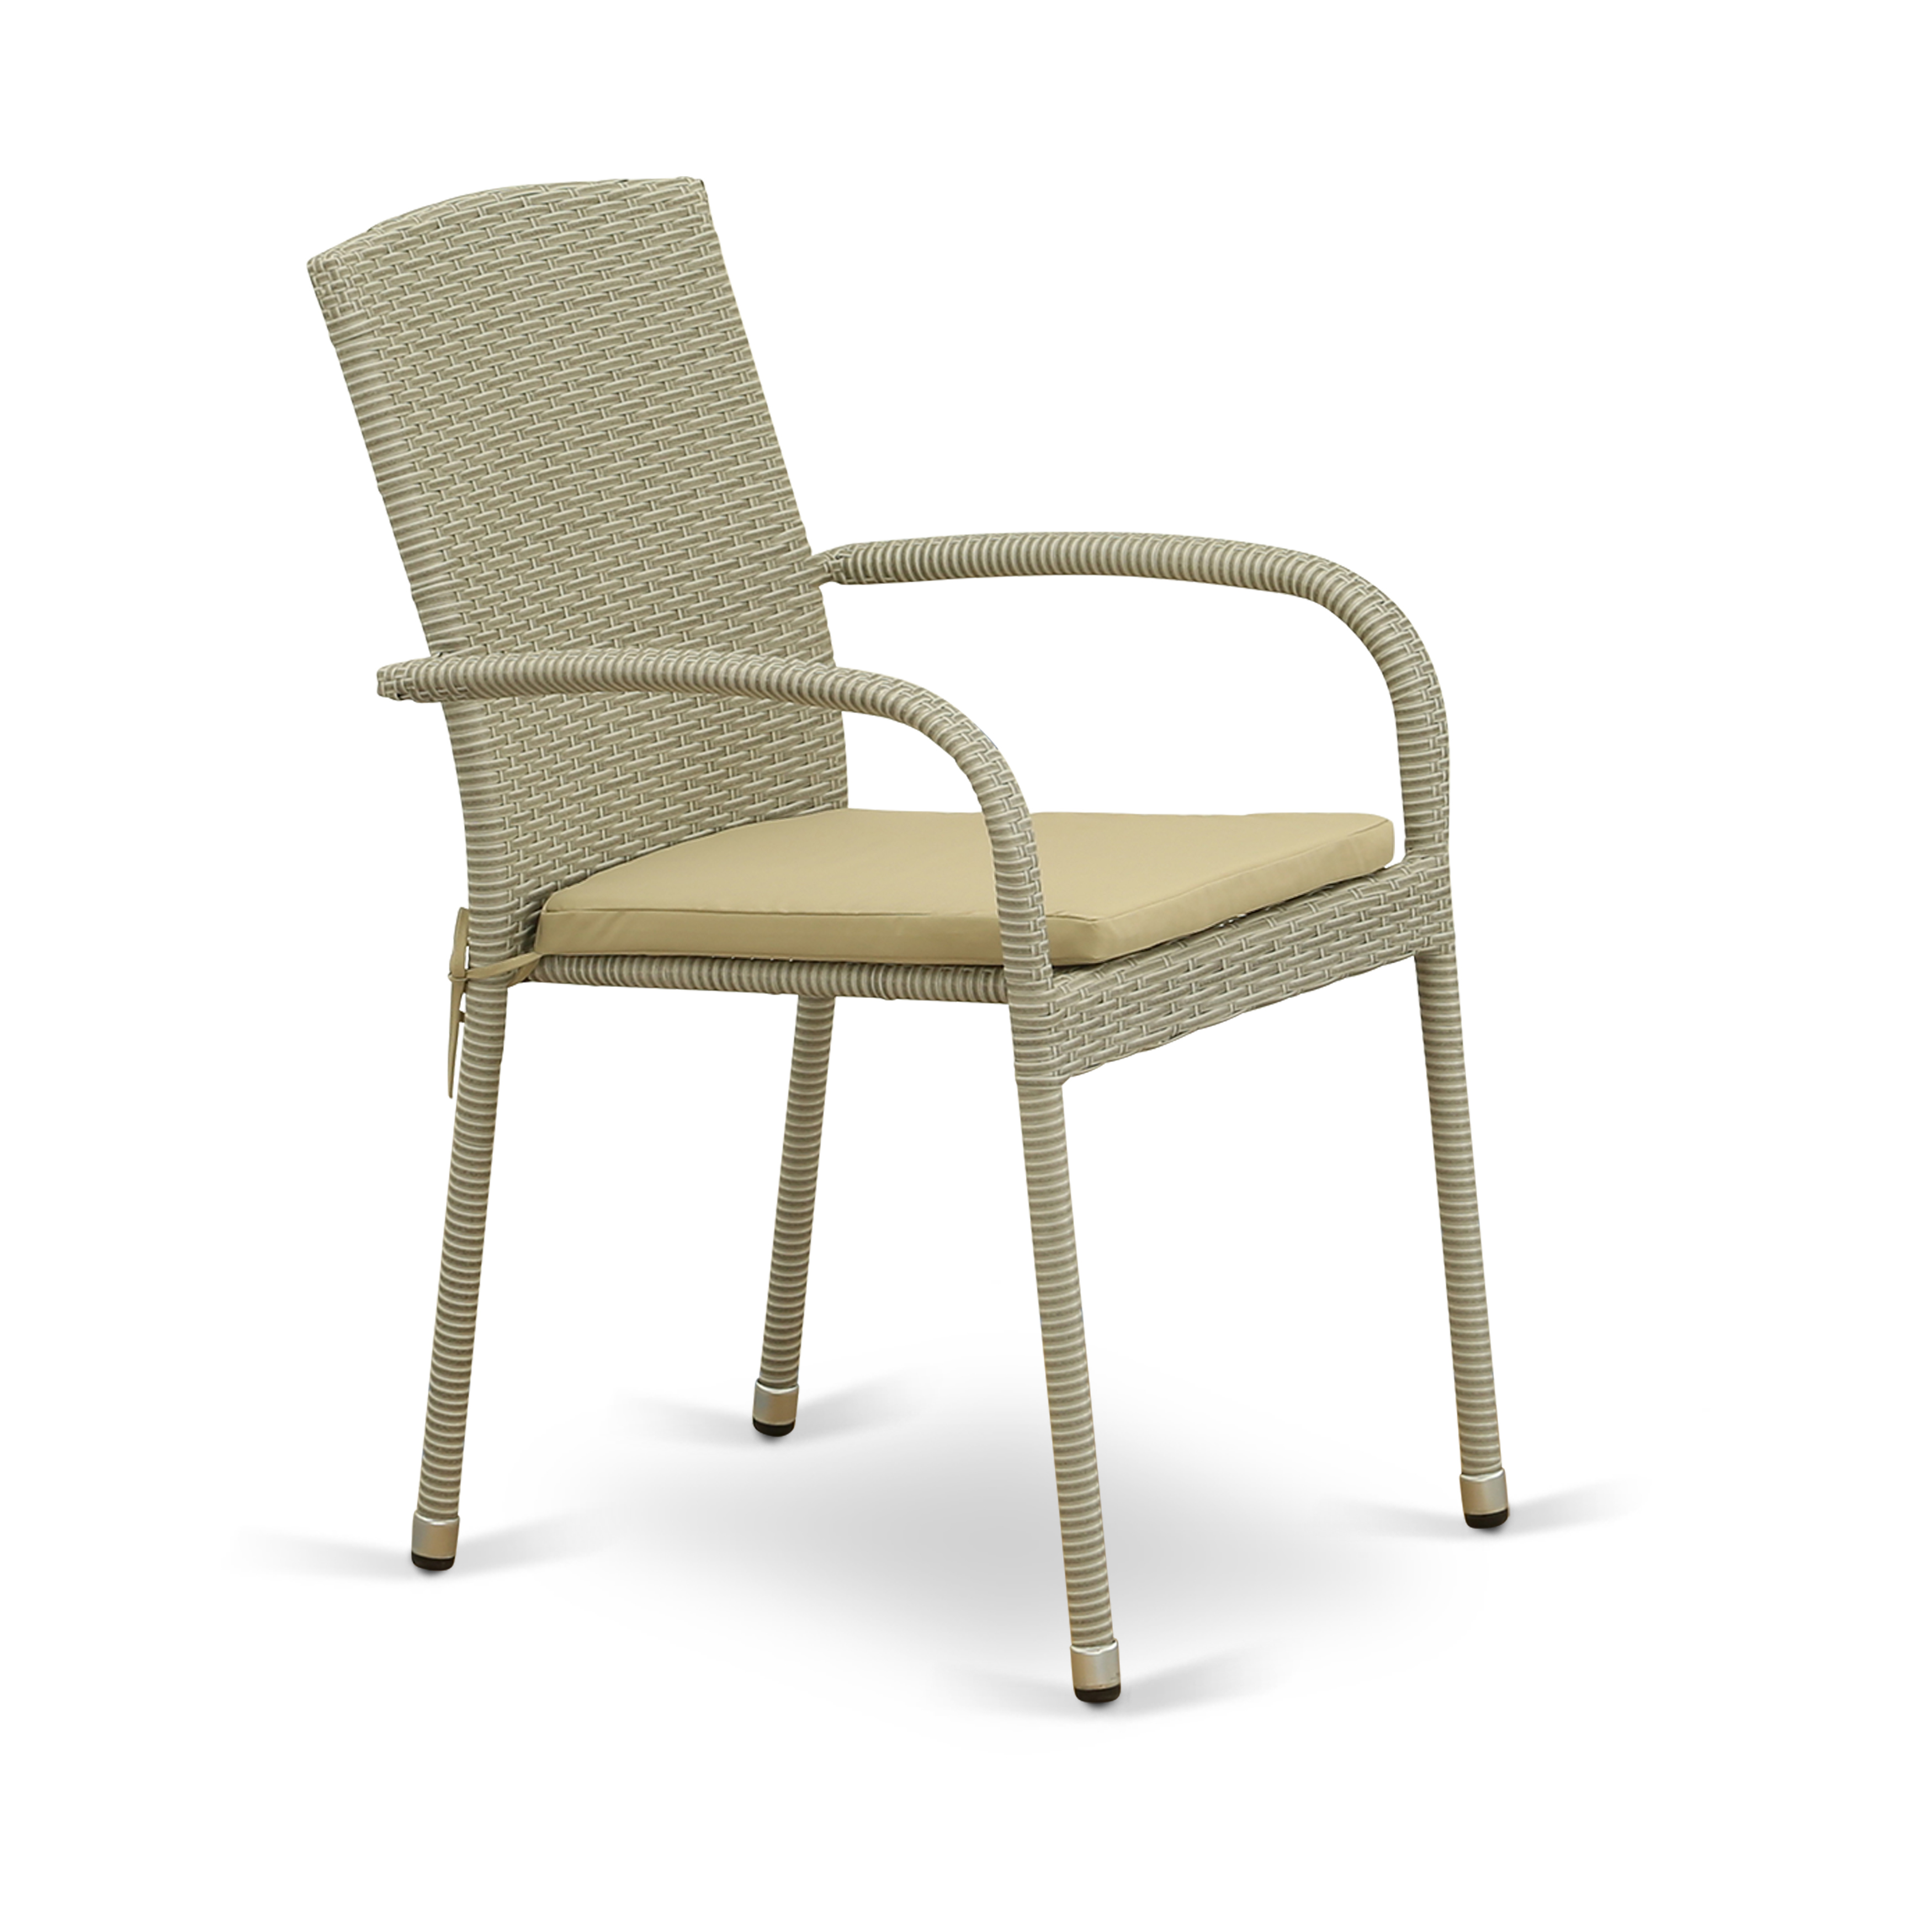 East West Furniture Outdoor Dining Chair - Wicker - Set of 2 - with Cushion - Natural and Beige - image 3 of 7